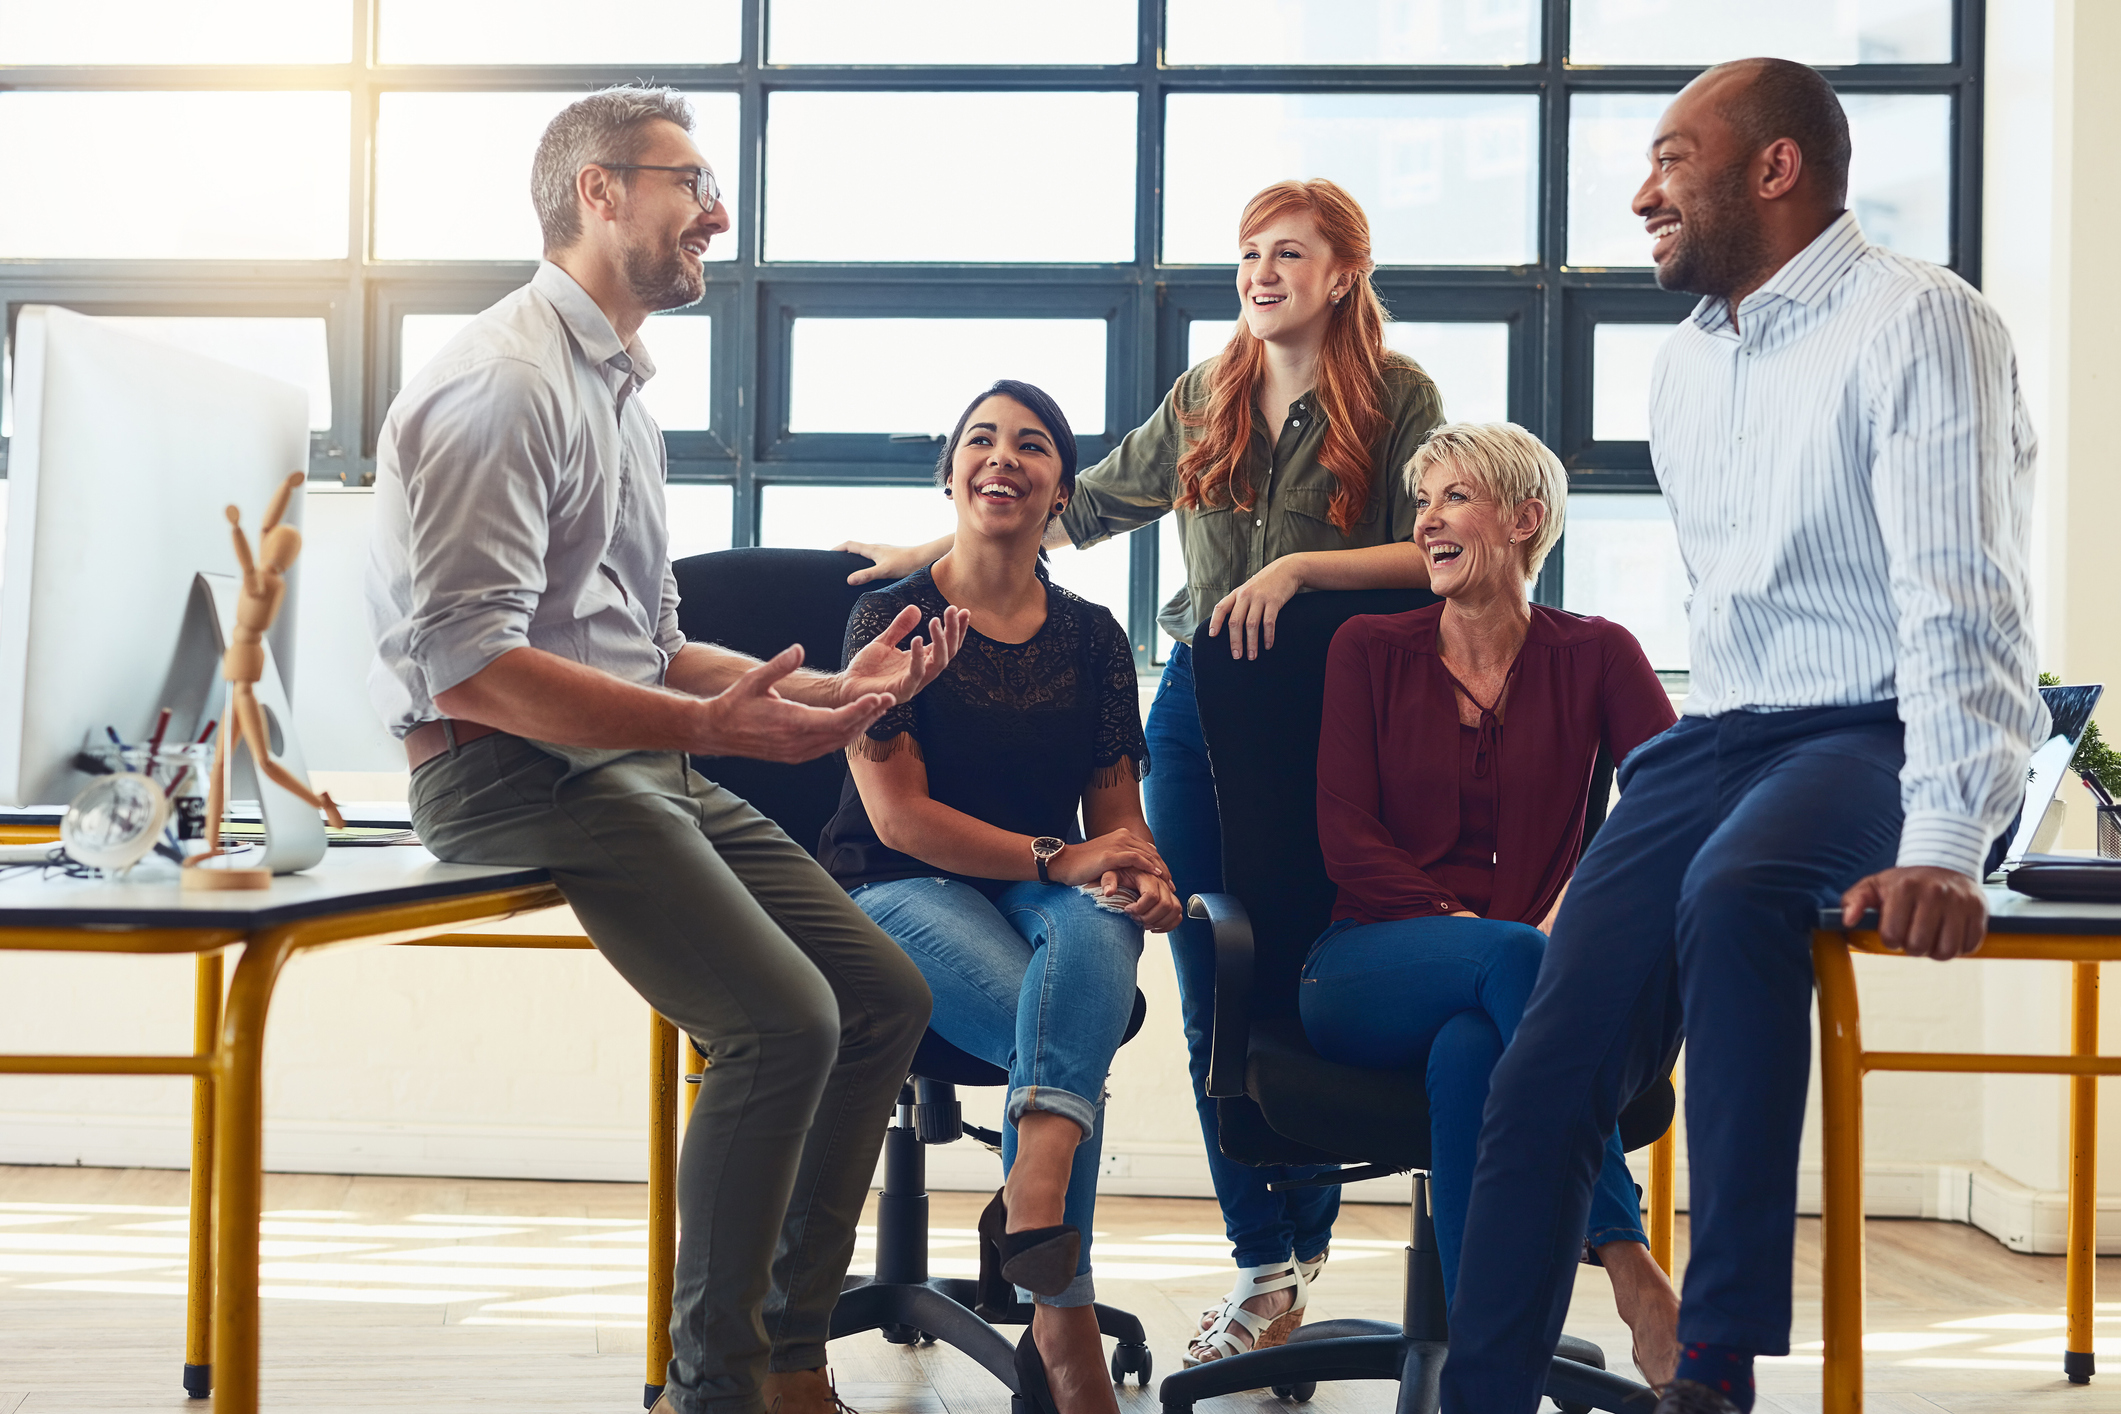 Employee Engagement and Connection at Work: Get ‘Real’ to Get Better